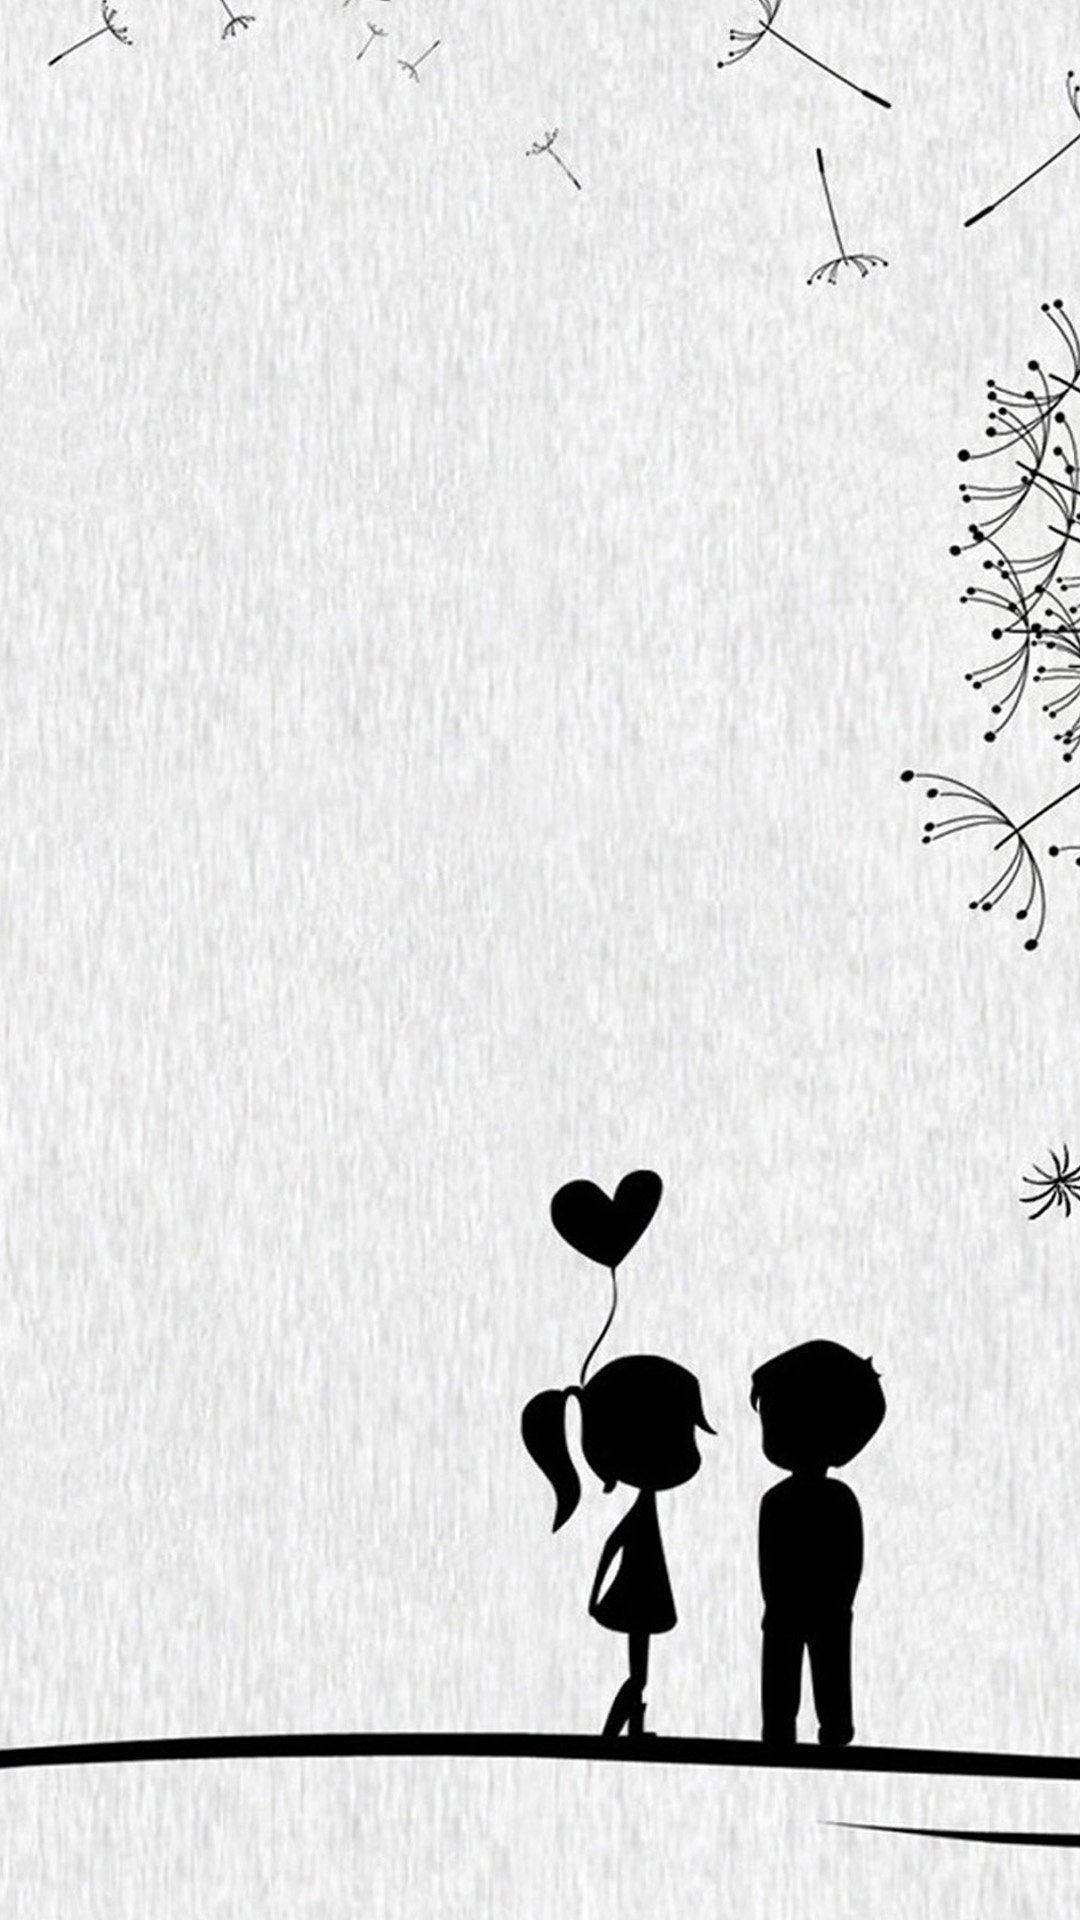 Cute Couple Silhouette With Heart Balloon Background